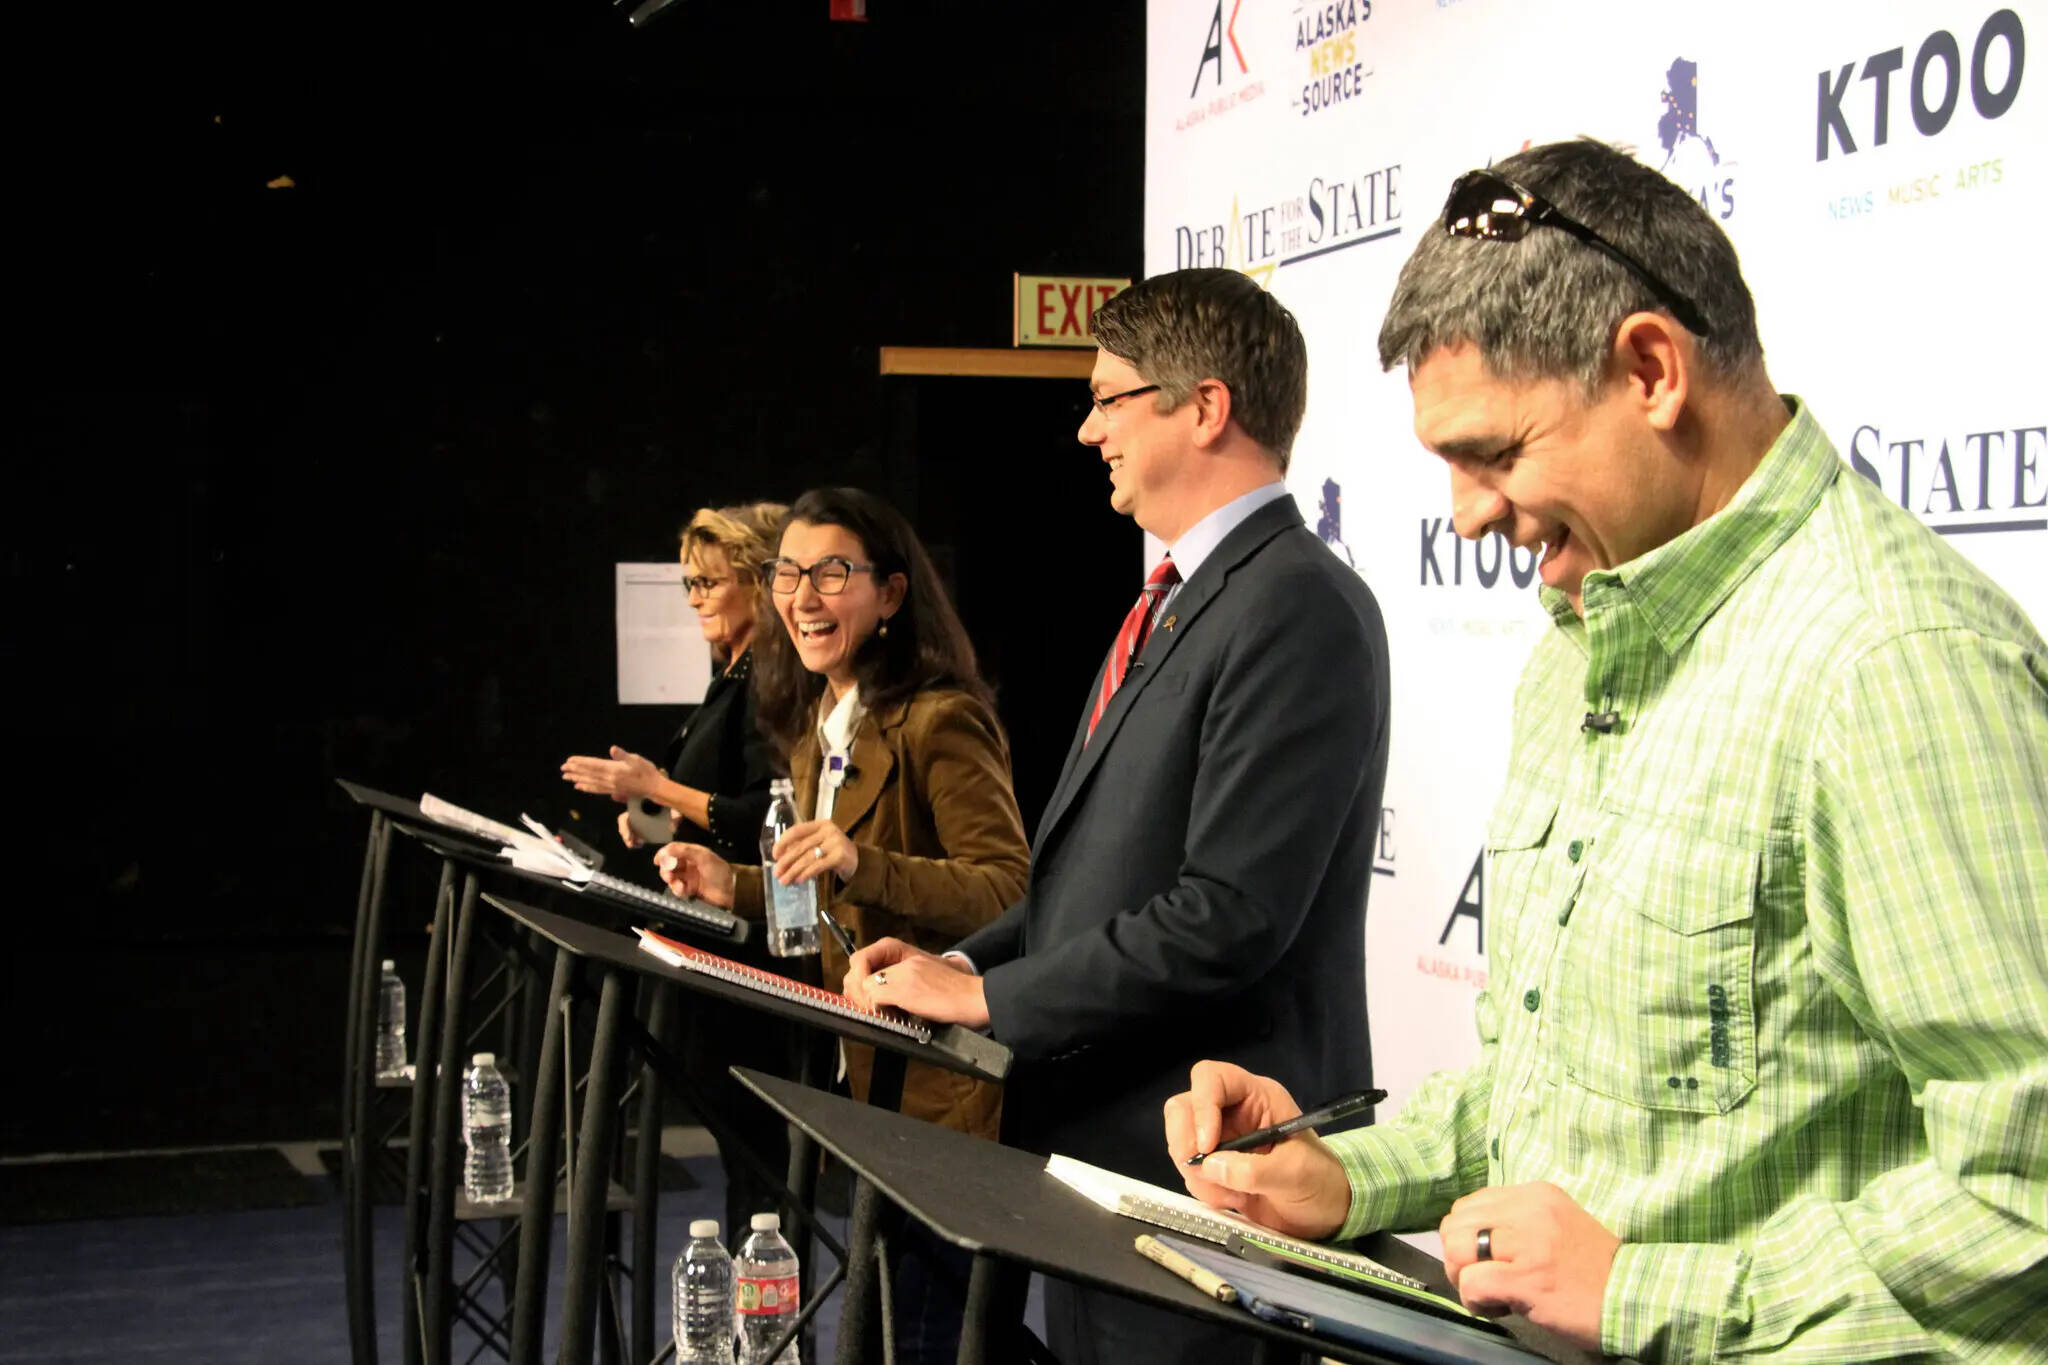 From left, onstage on Wednesday in Anchorage for a debate in Alaska’s U.S. House race: former Gov. Sarah Palin, Rep. Mary Peltola, Nick Begich III and Chris Bye. (Mark Thiessen / Associated Press)